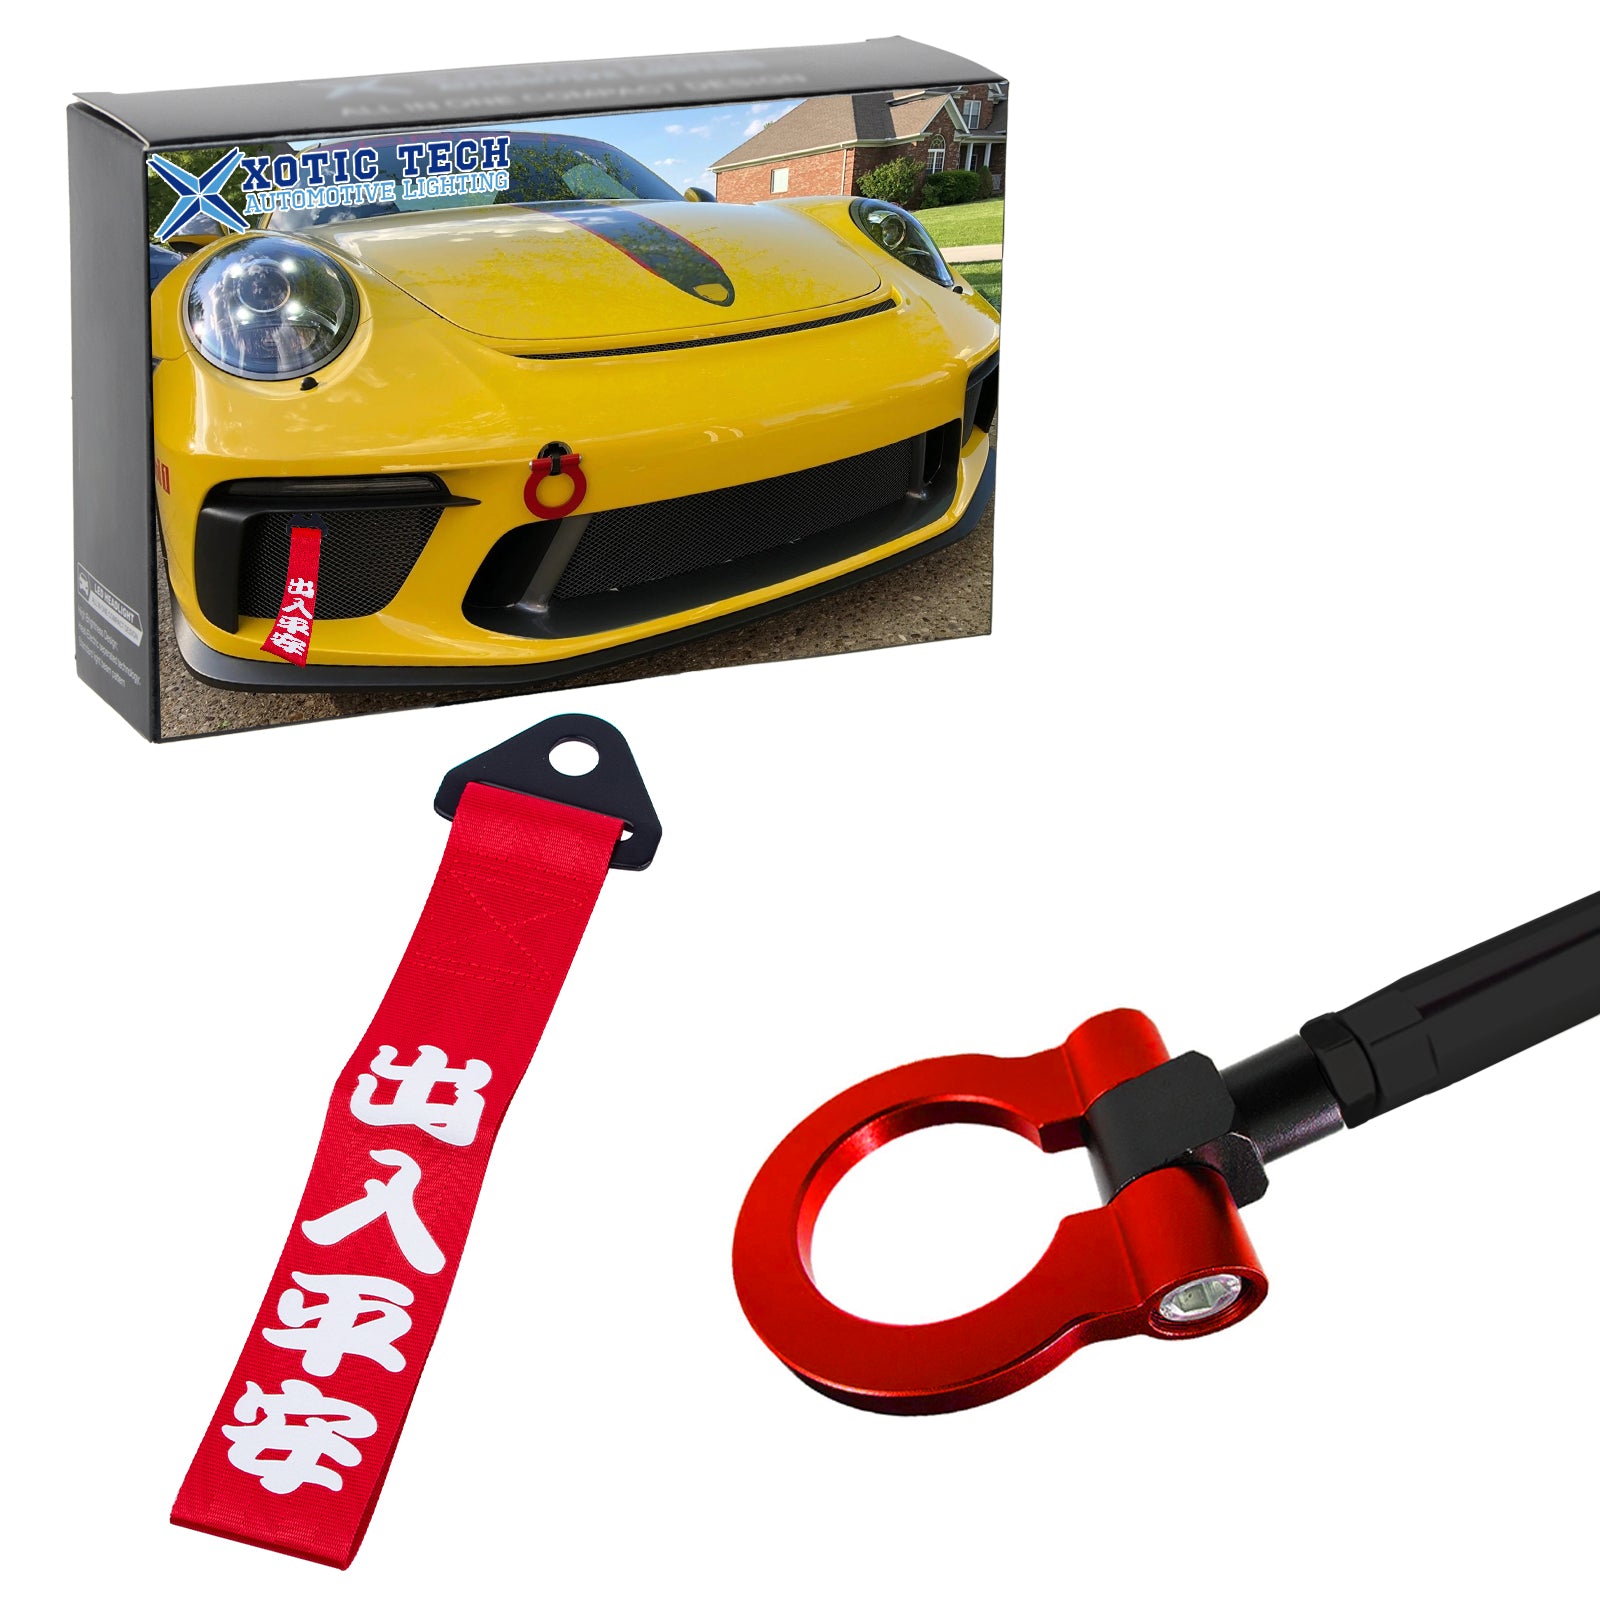 2X JDM Style Aluminum Towing Hook+Tow Strap For Porsche Carrera 911 99